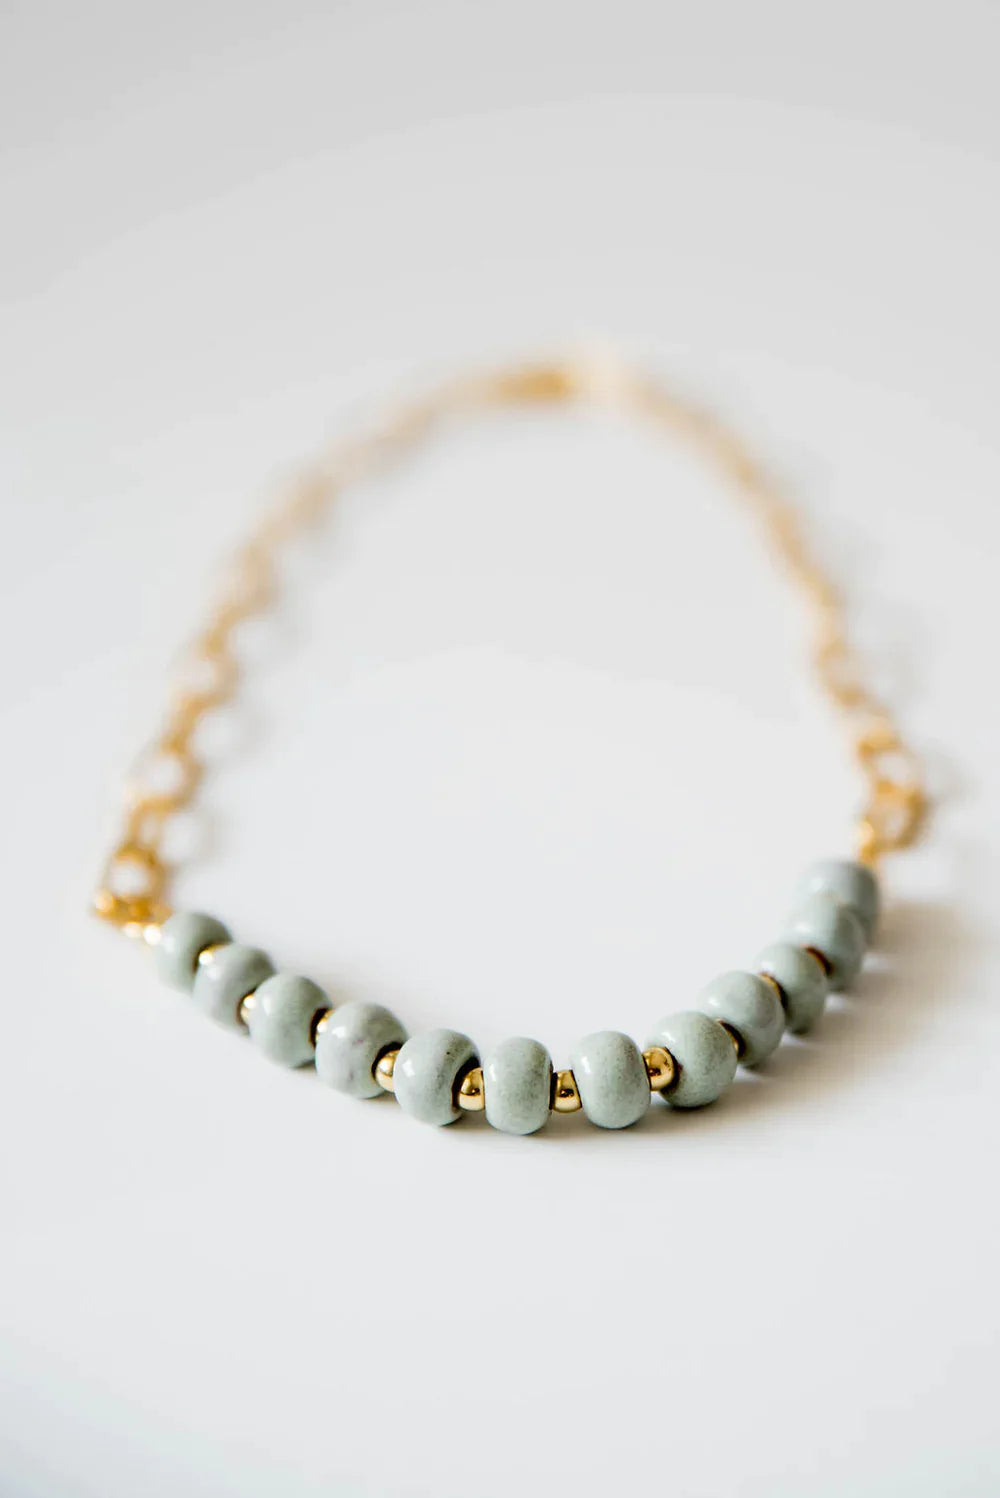 Bel Koz Gold Single Strand Clay Necklace - MINTED - Link in description to purchase at Betsey's